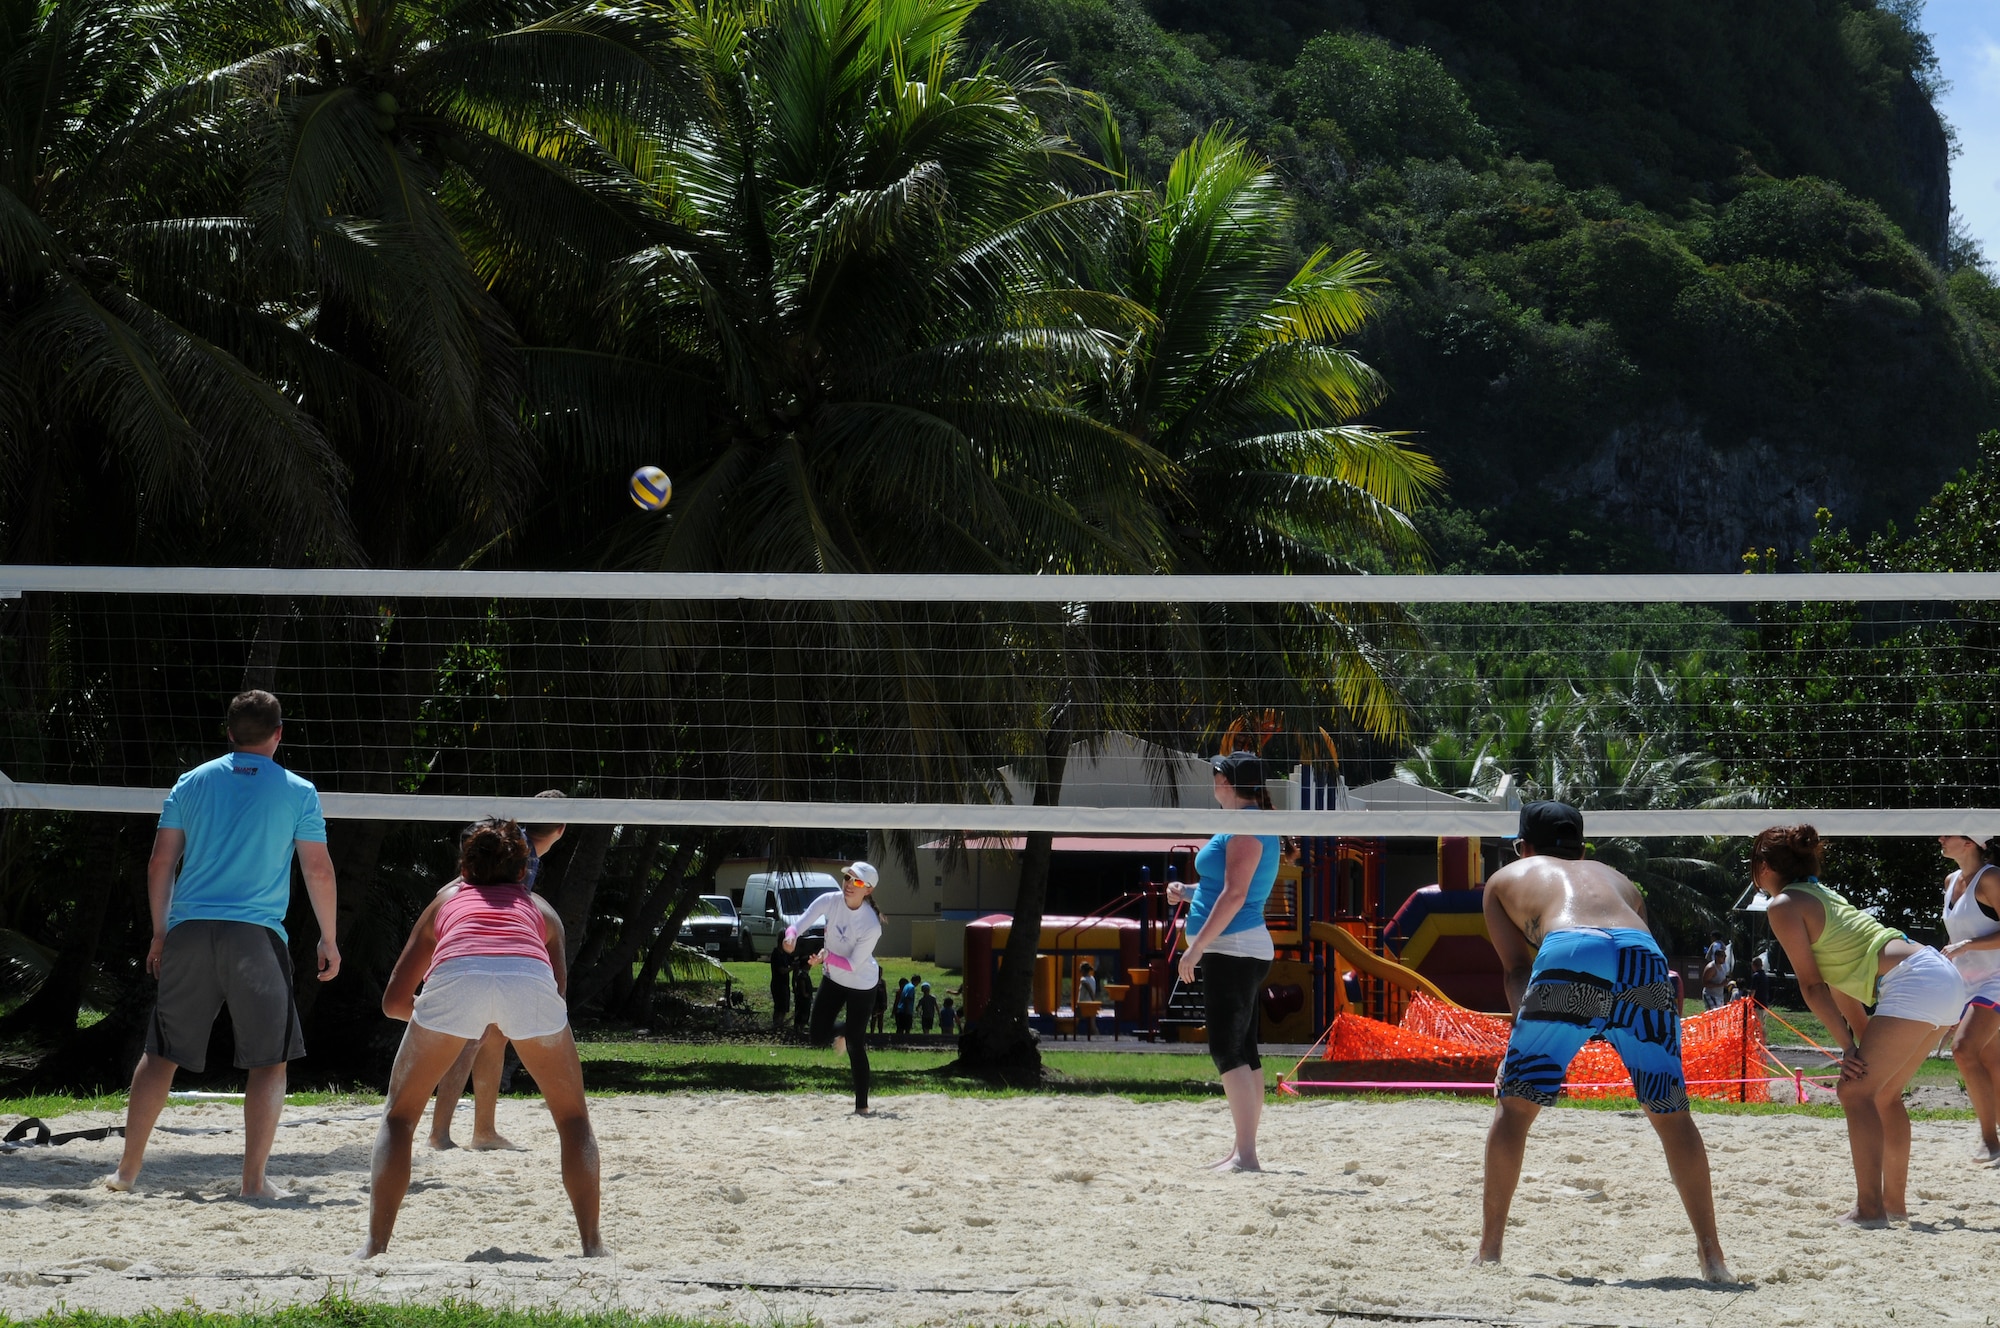 Members of Team Andersen play in a sand volleyball tournament during the Freedom Fest July 5, 2013, on Andersen Air Force Base, Guam. Sand volleyball, horseshoes and sandcastle contests were some of the events held during Freedom Fest at Tarague Beach in celebration of Independence Day. (U.S. Air Force photo by Staff Sgt. Melissa B. White/Released)